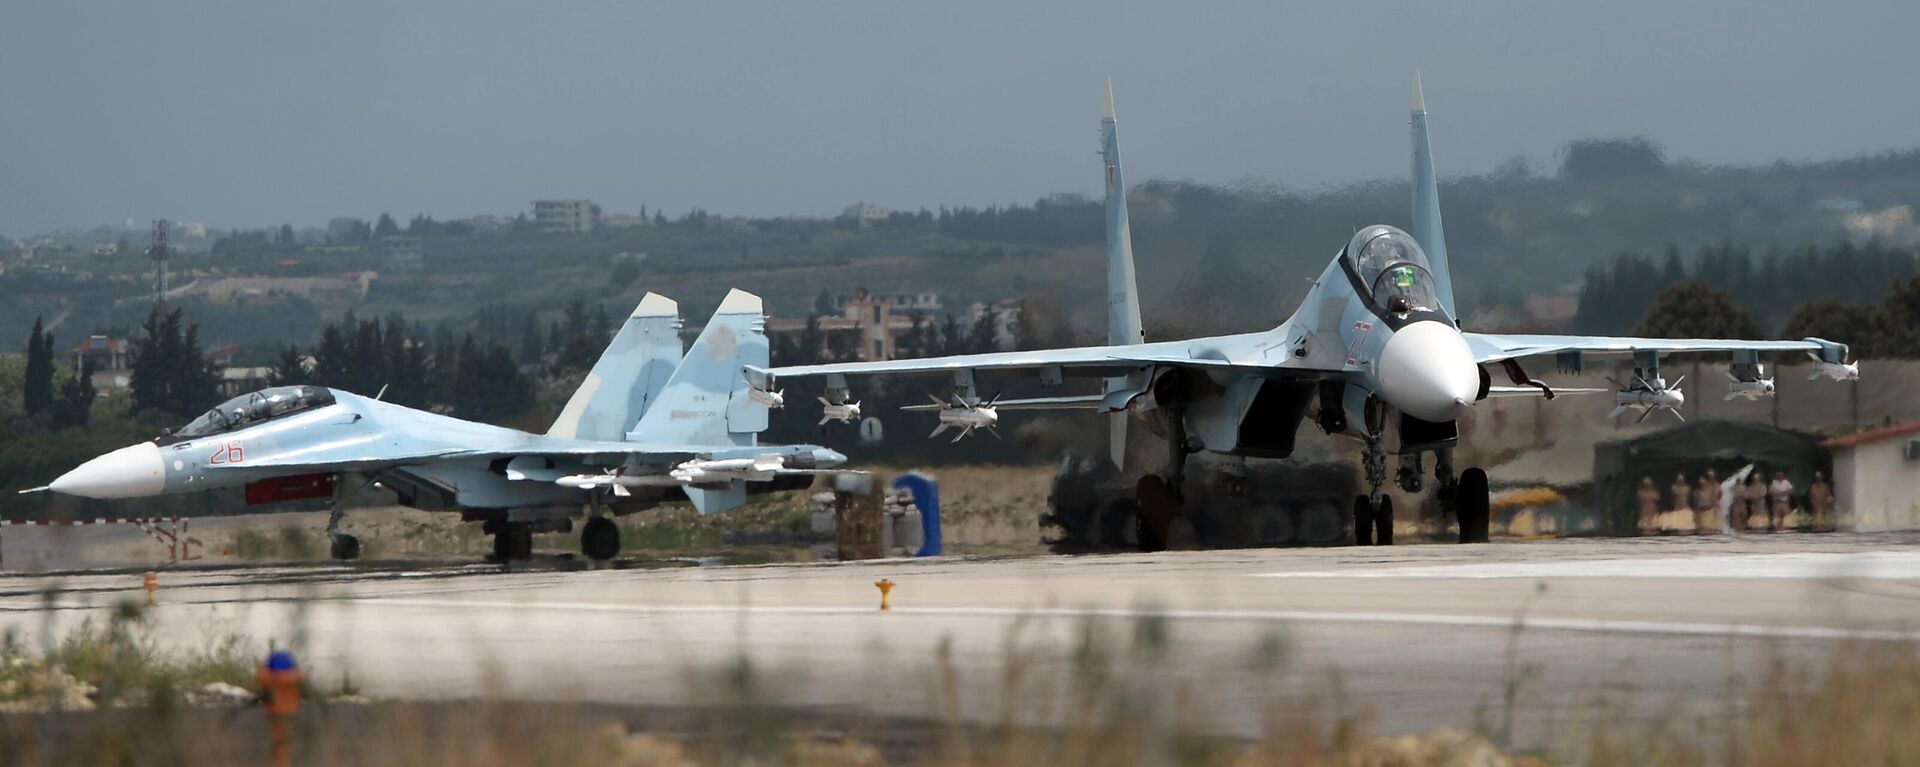 Russian Su-30 fighter jets before a takeoff at the Hmeimim airbase in Syria. - Sputnik International, 1920, 16.03.2024